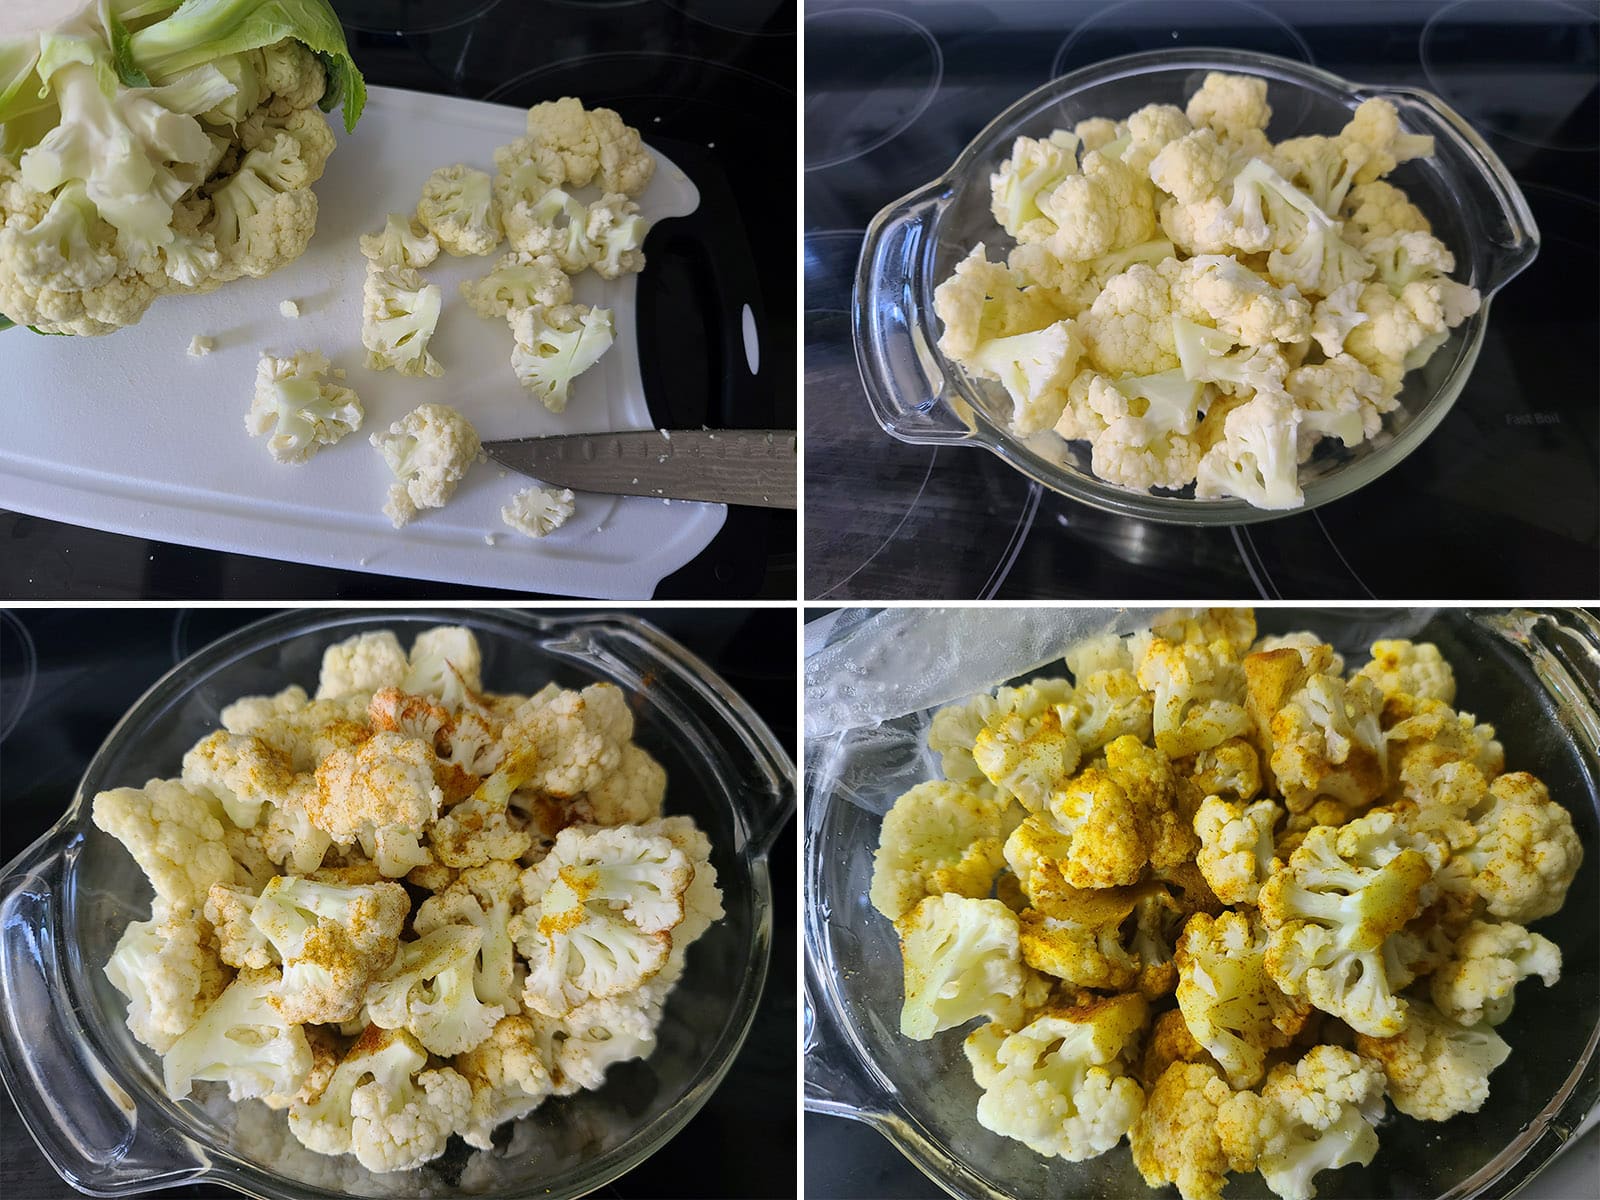 A 4 part image showing the cauliflower being sectioned, tossed with spices, and cooked.